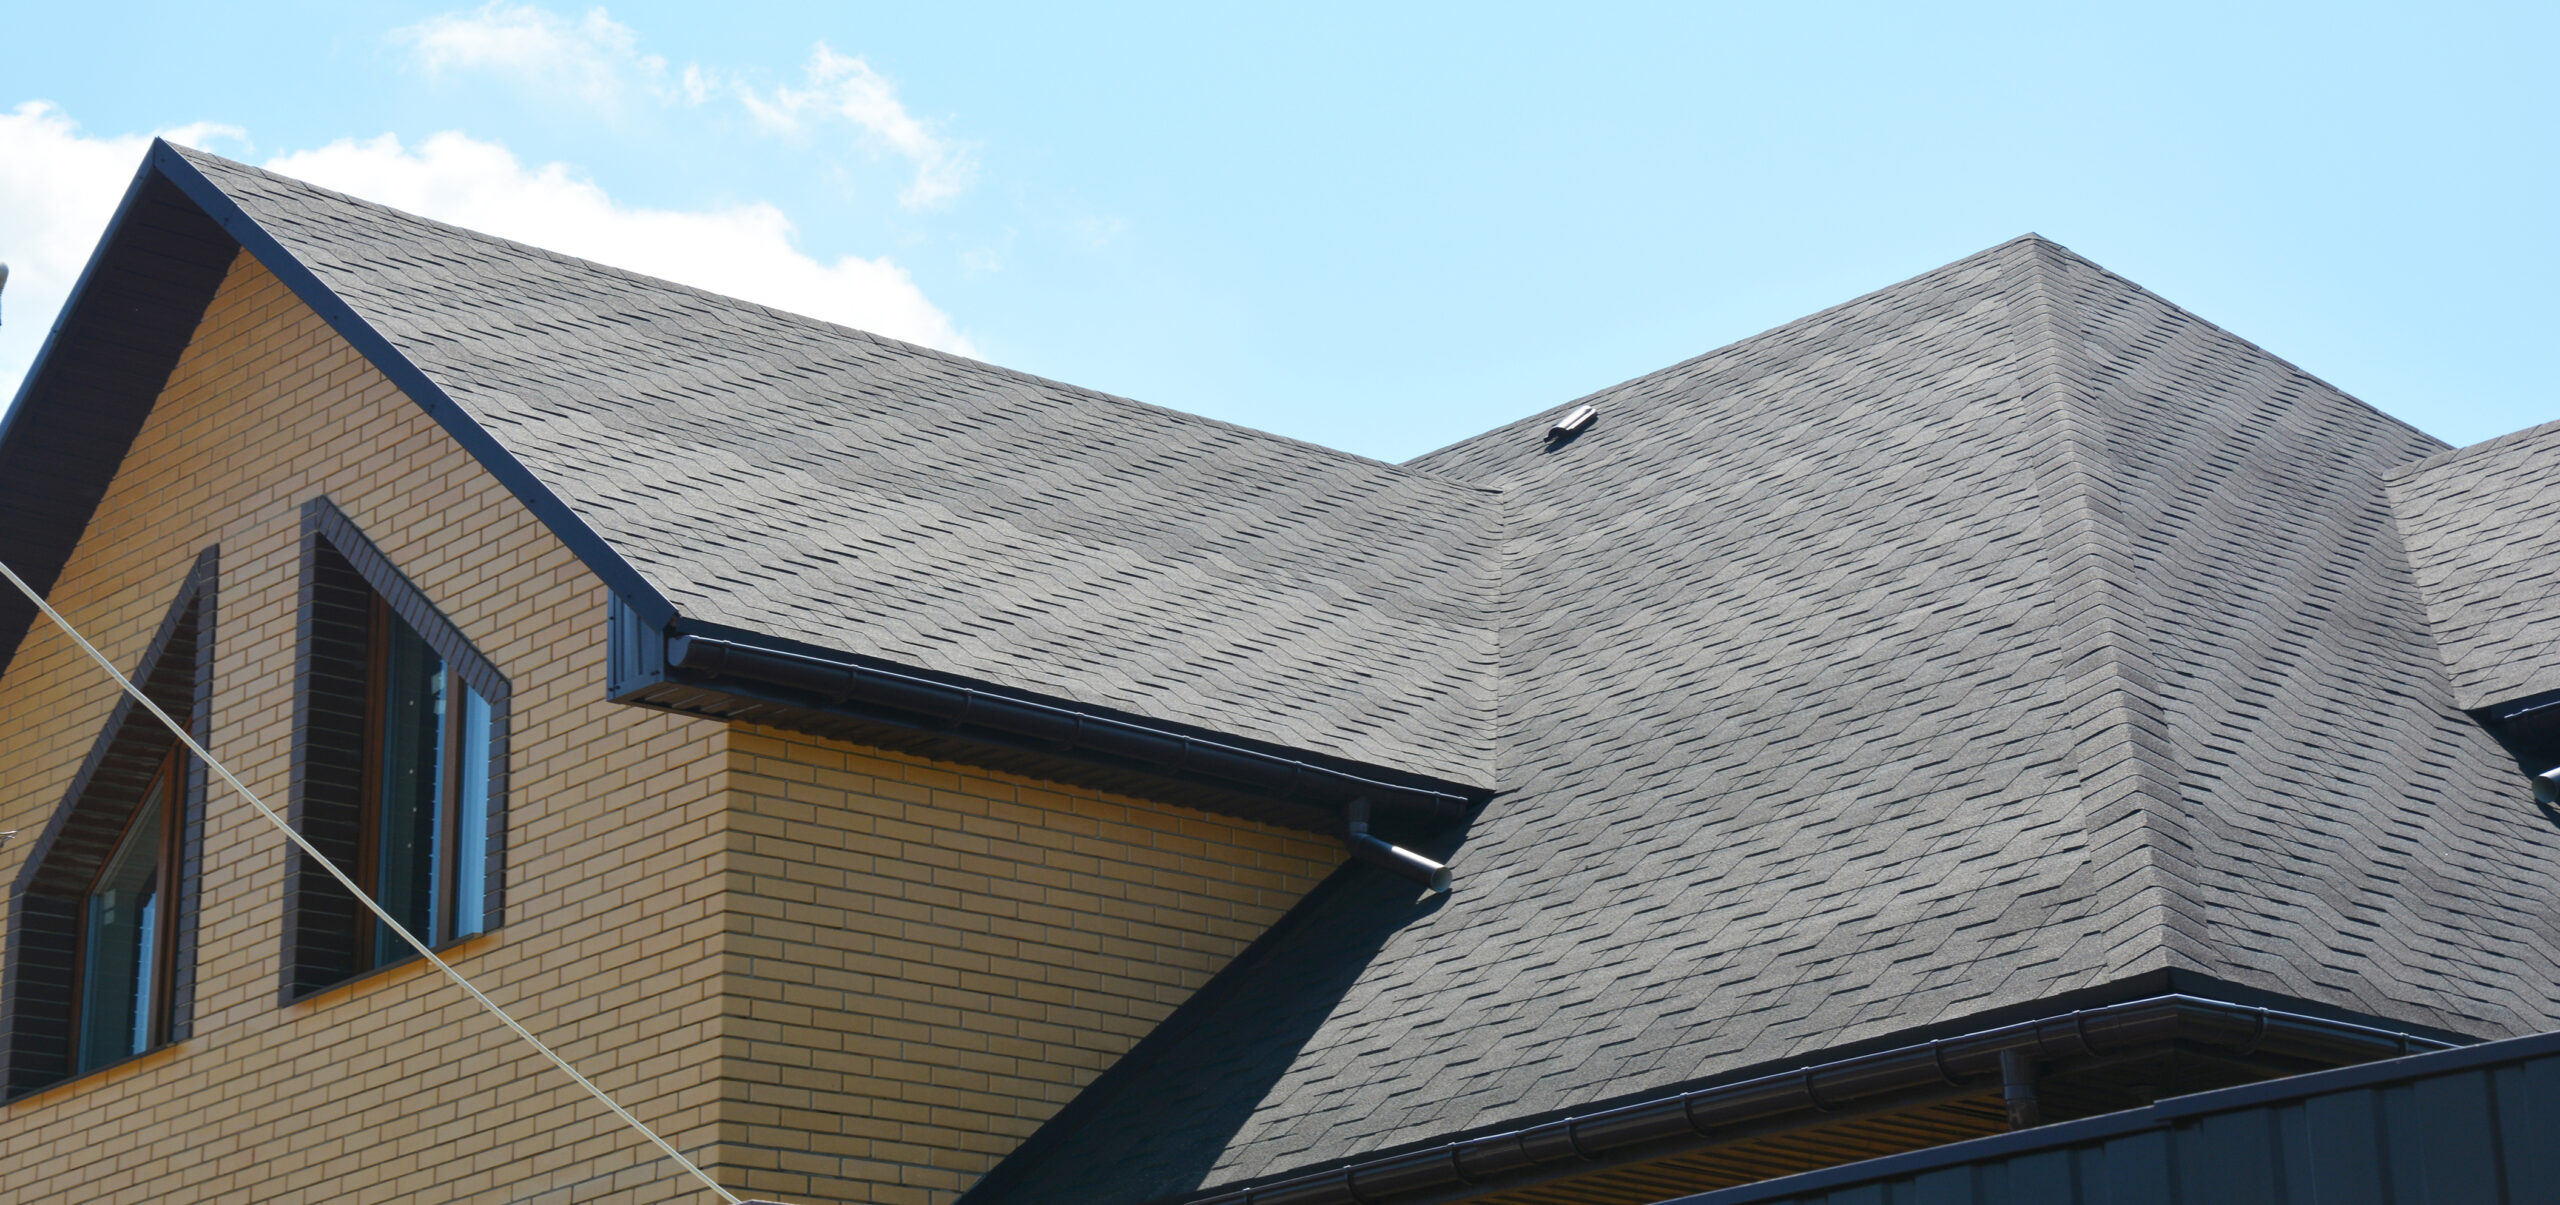 lenoir roofer here to repair or replace your roof. 